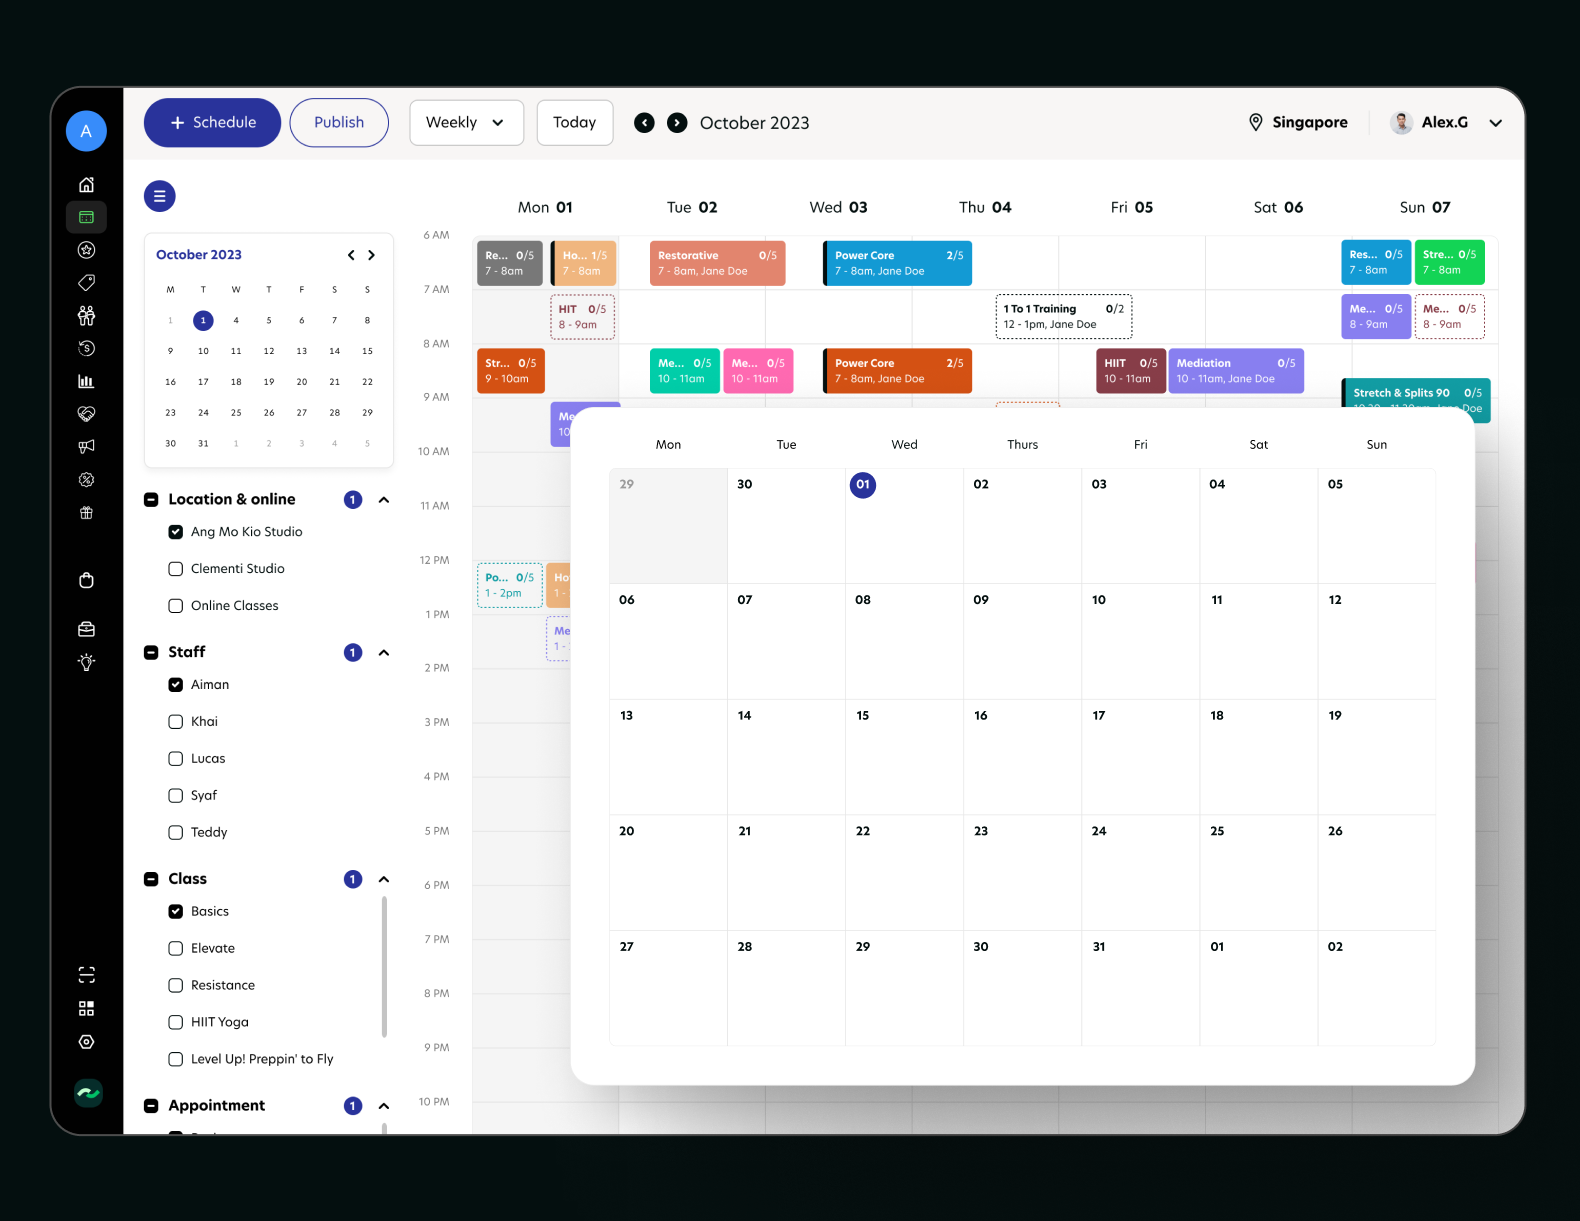 Efficiently create schedules within days, weeks, and months